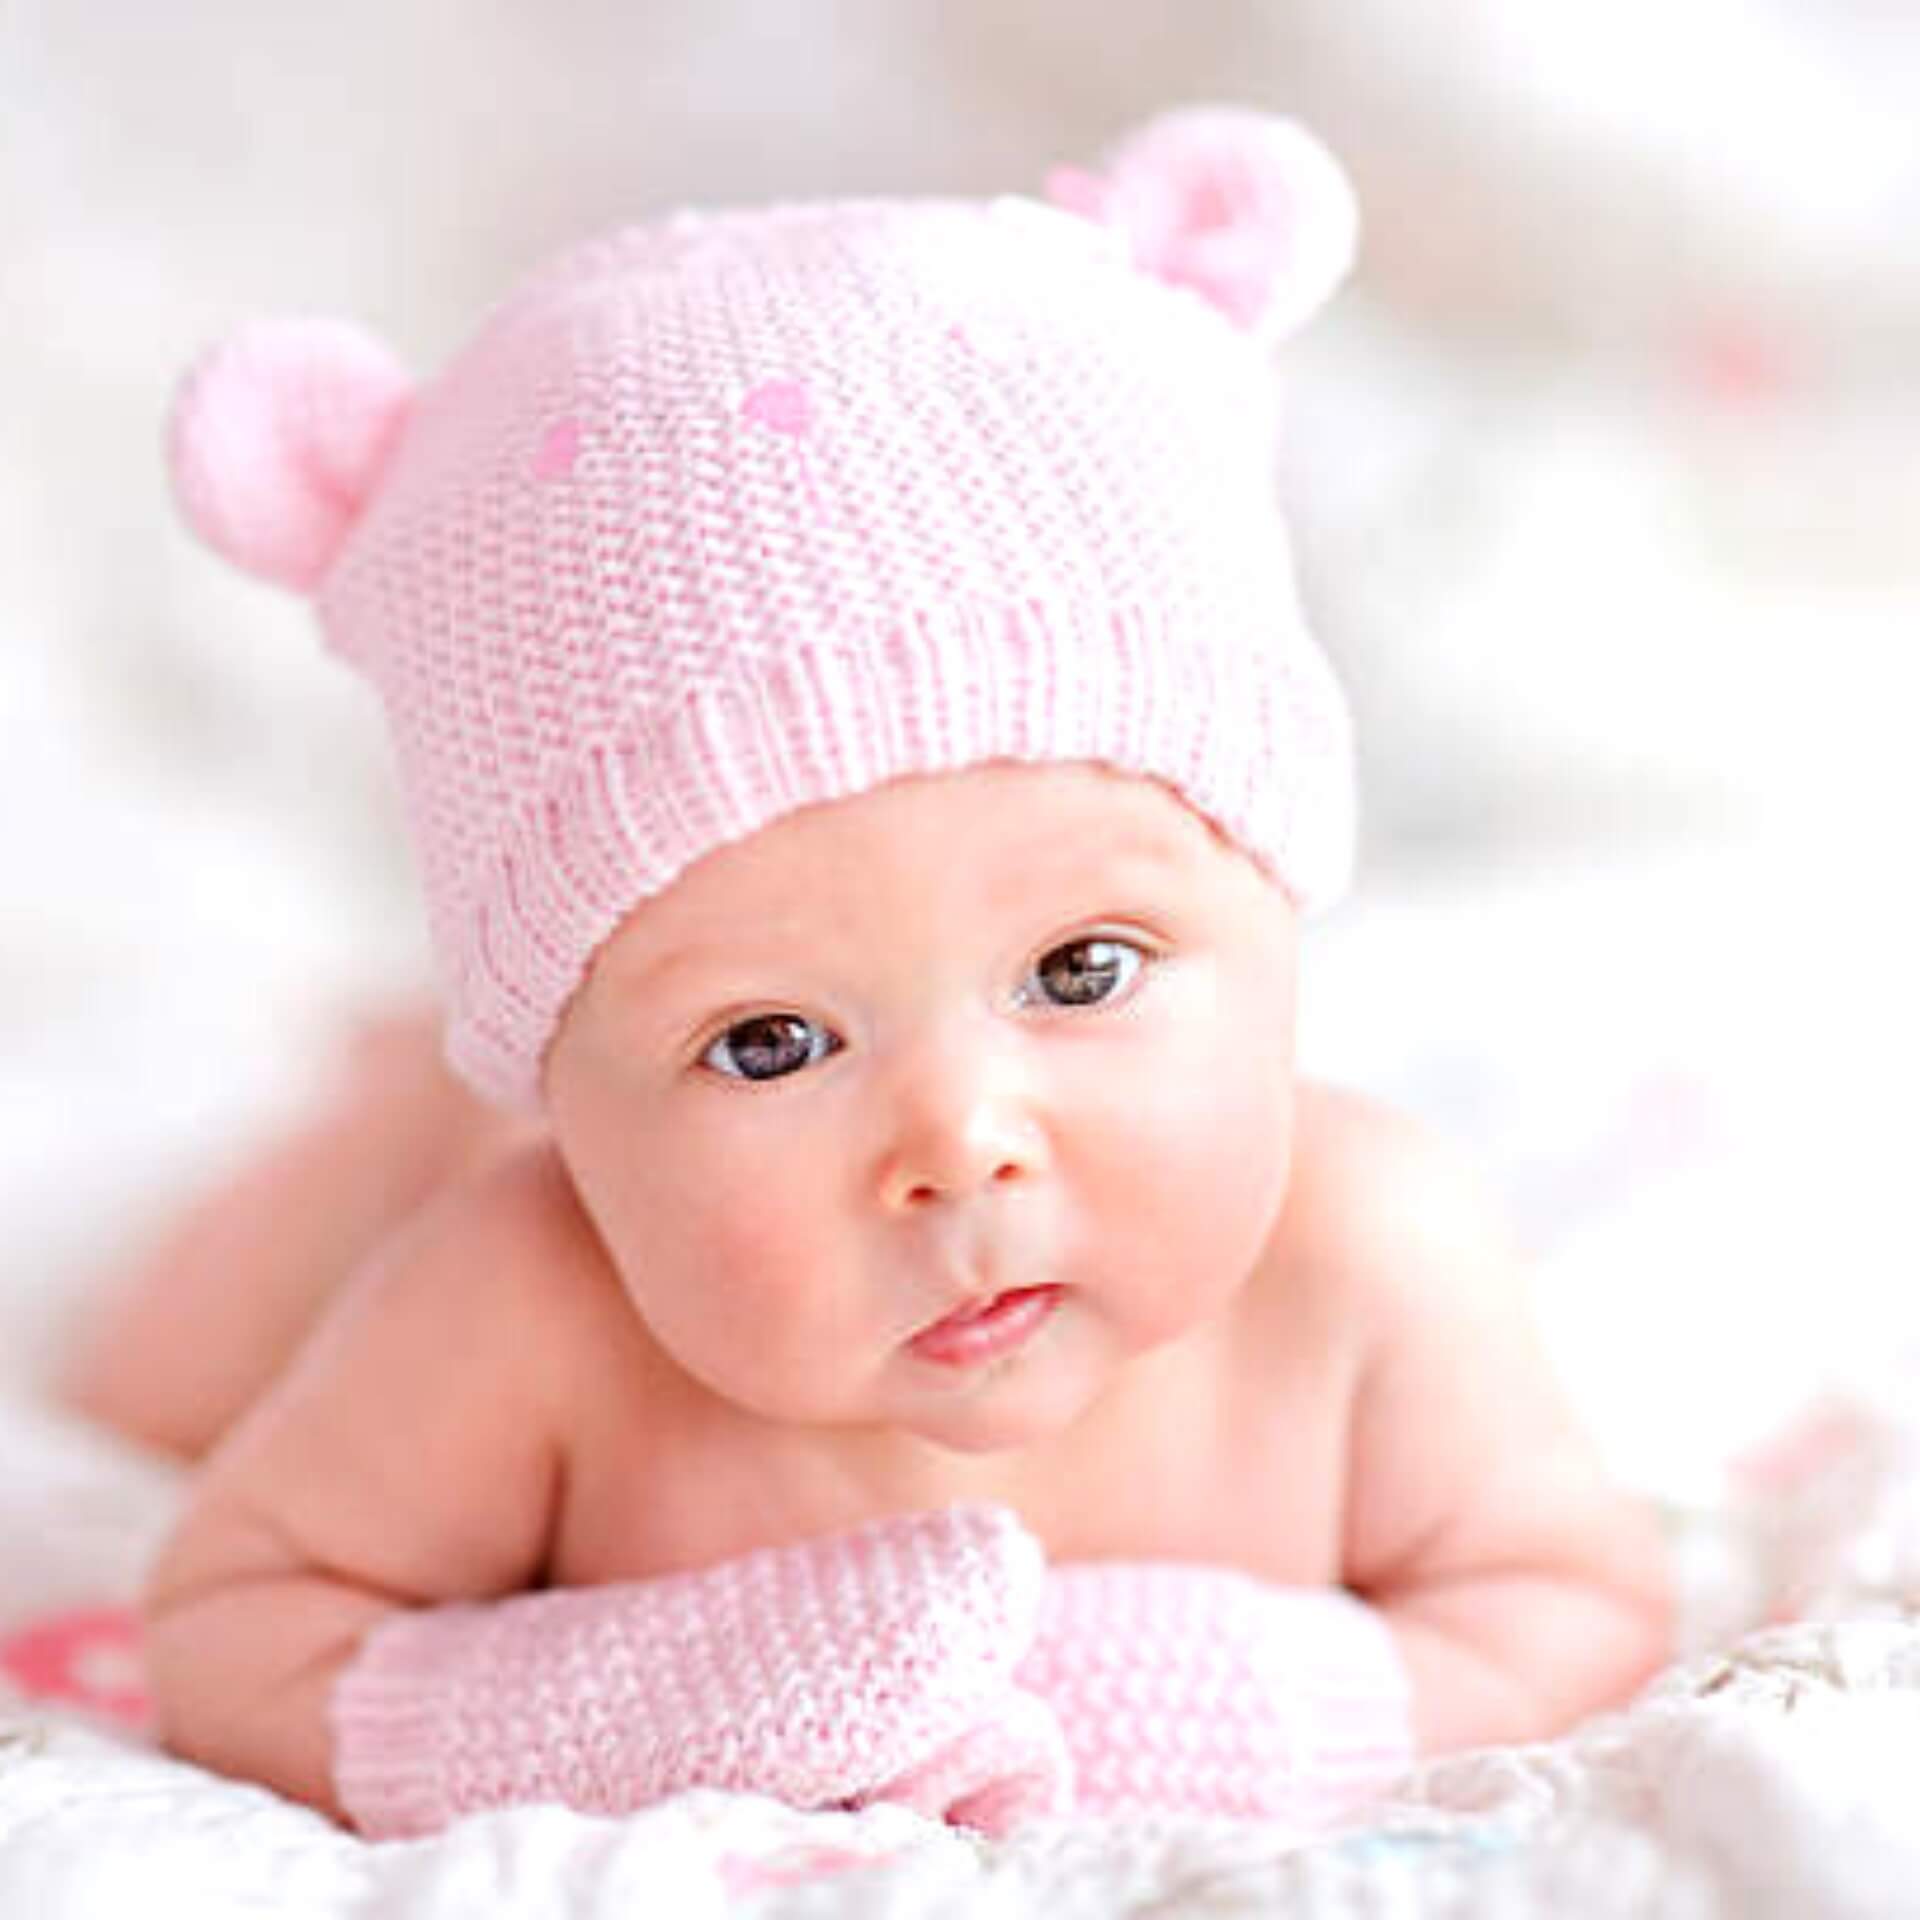 Cute Baby Boys & Girls Whatsapp DP Images for Mobile 458+ DP For Mobile